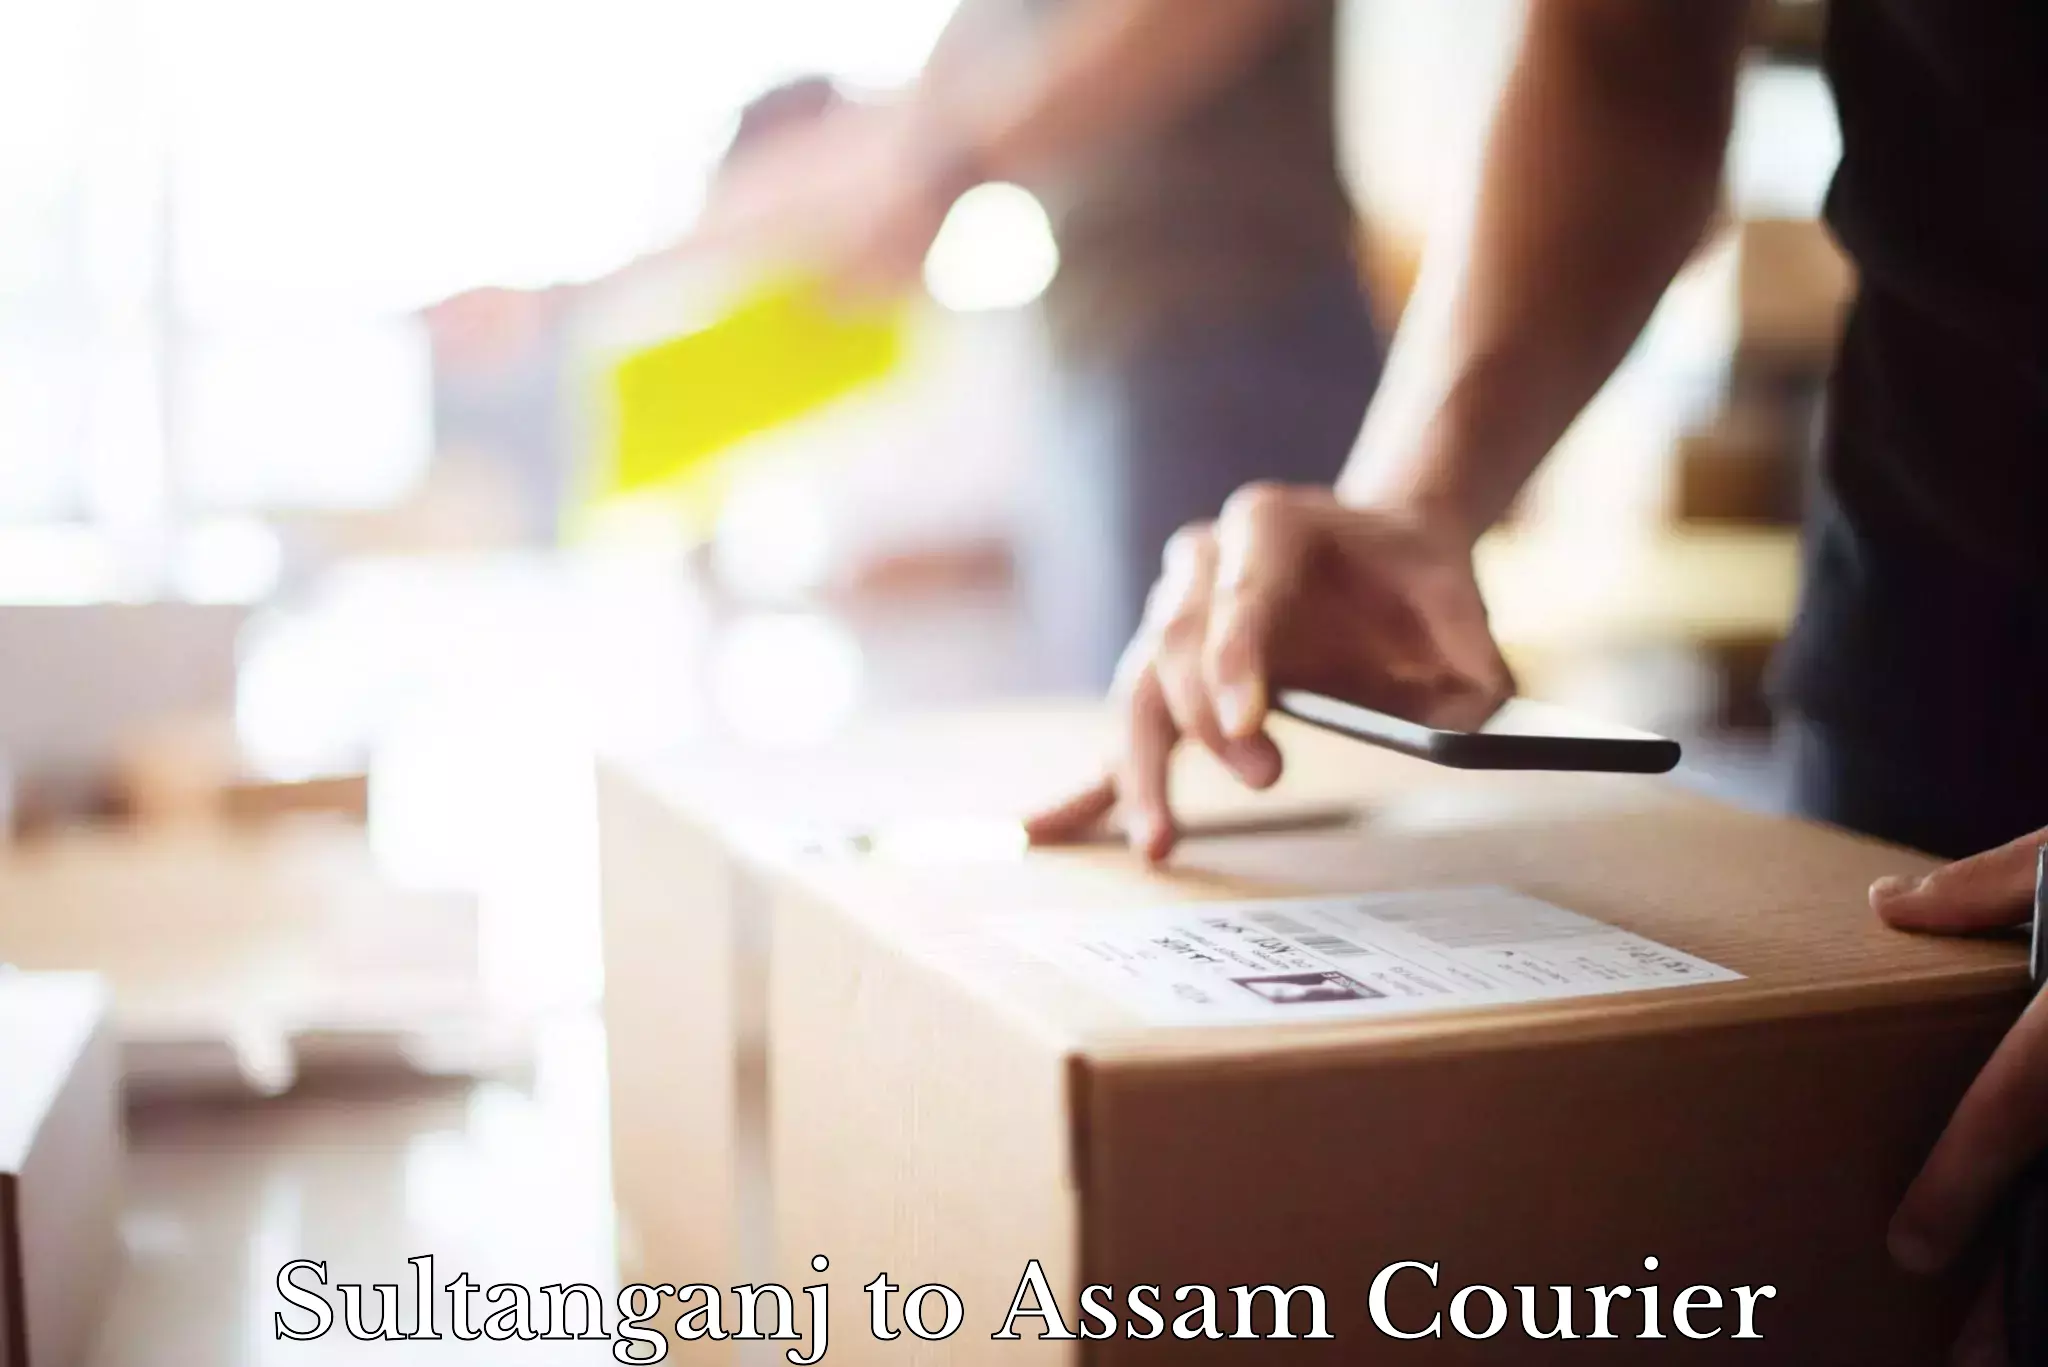 Courier service booking in Sultanganj to Hajo